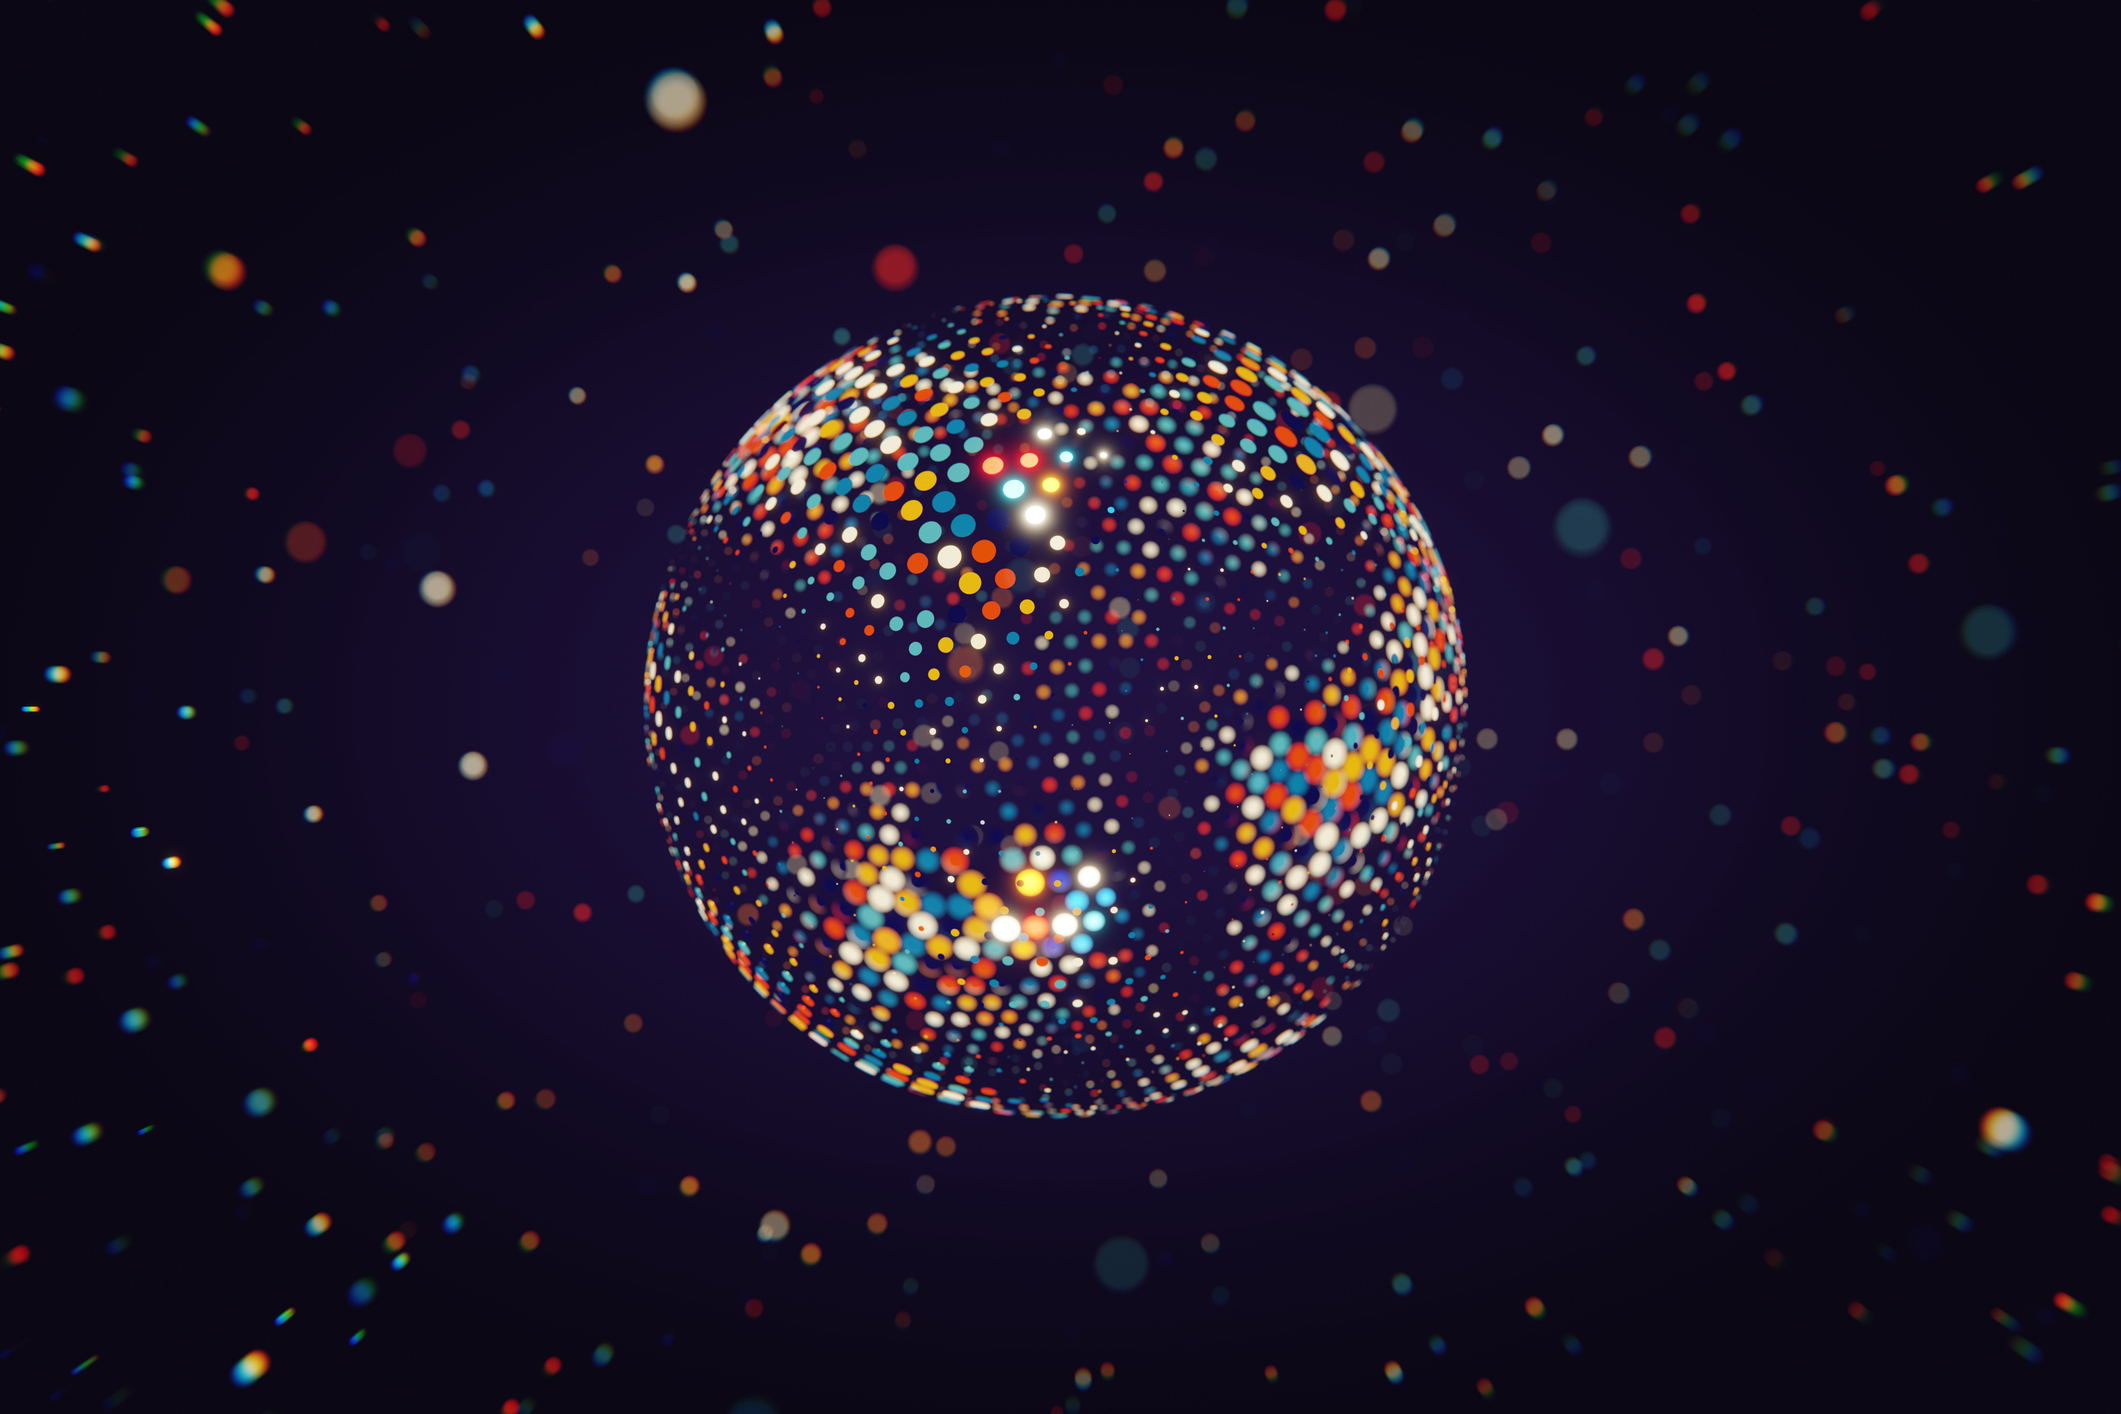 A spherical disco ball with various small, colorful reflective tiles, set against a dark background with scattered light reflections